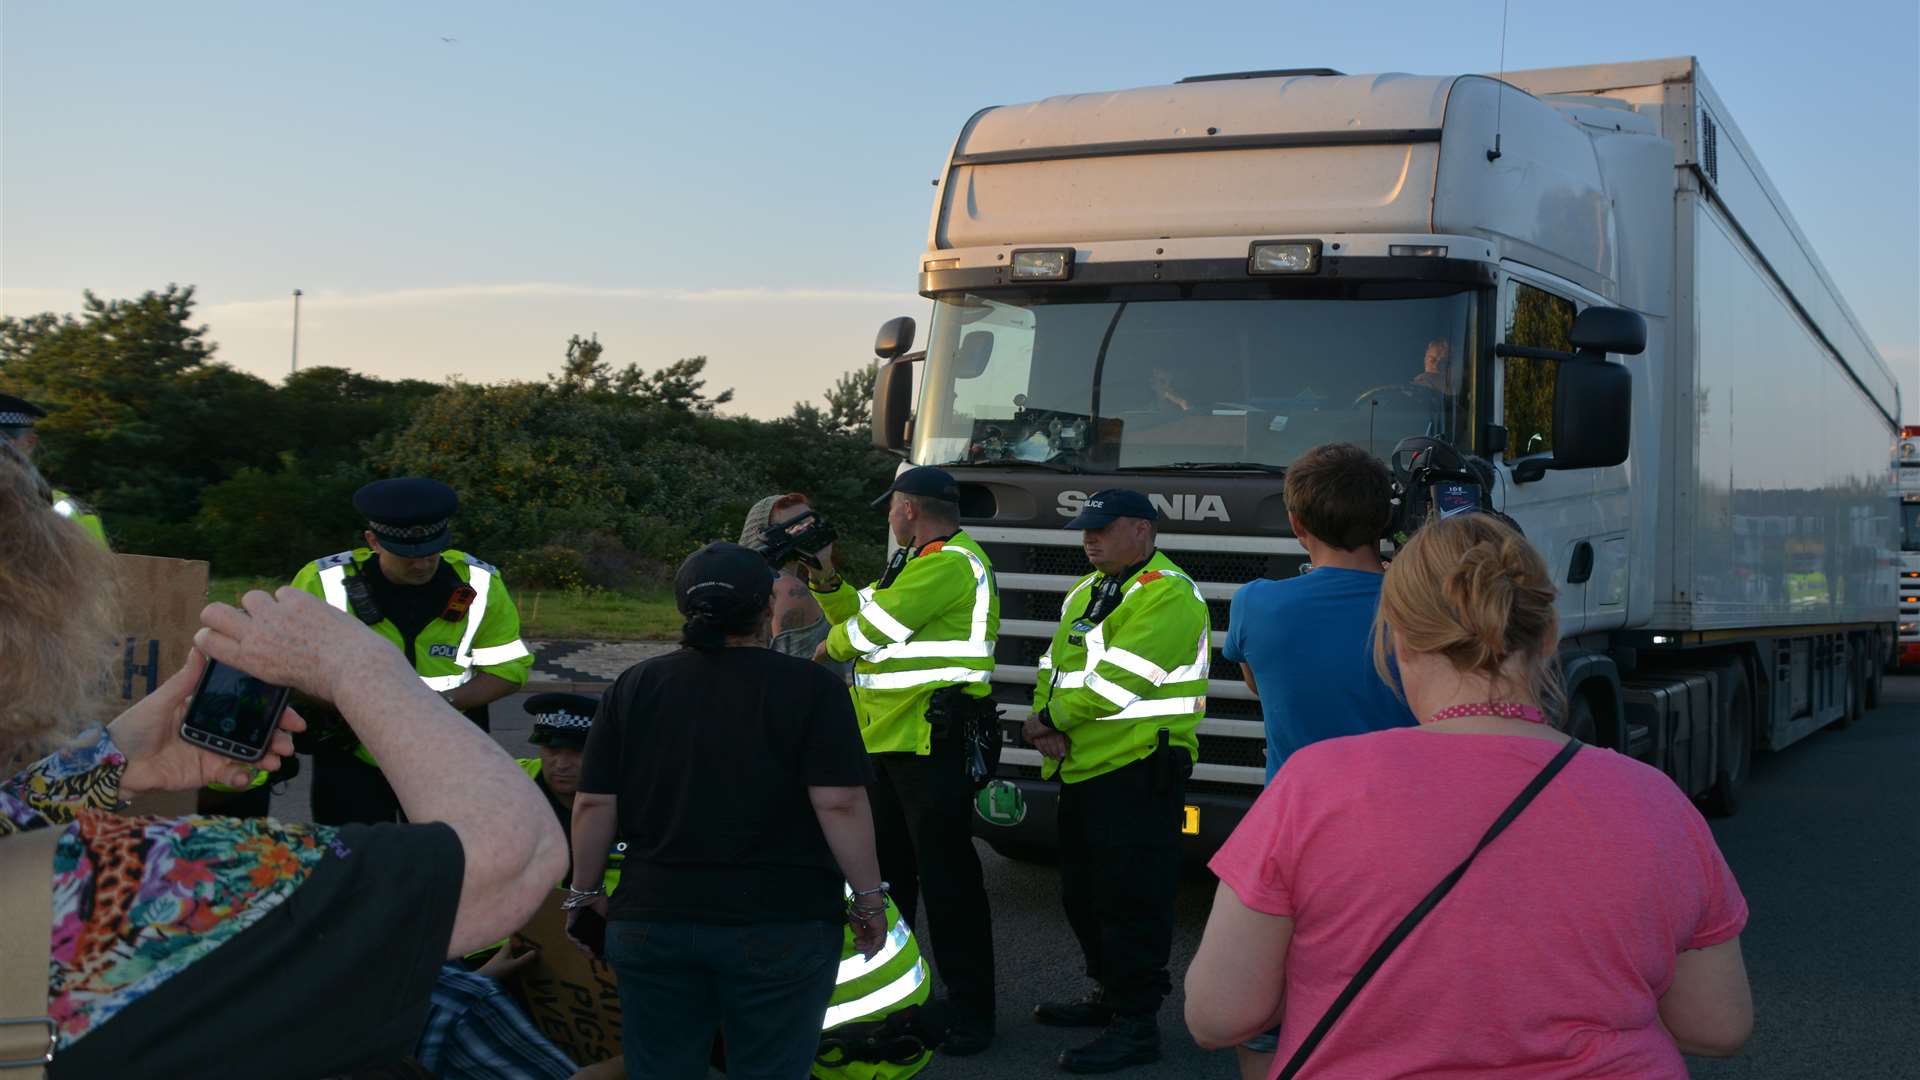 Campaigners were chanting at drivers of the lorries carrying live animals